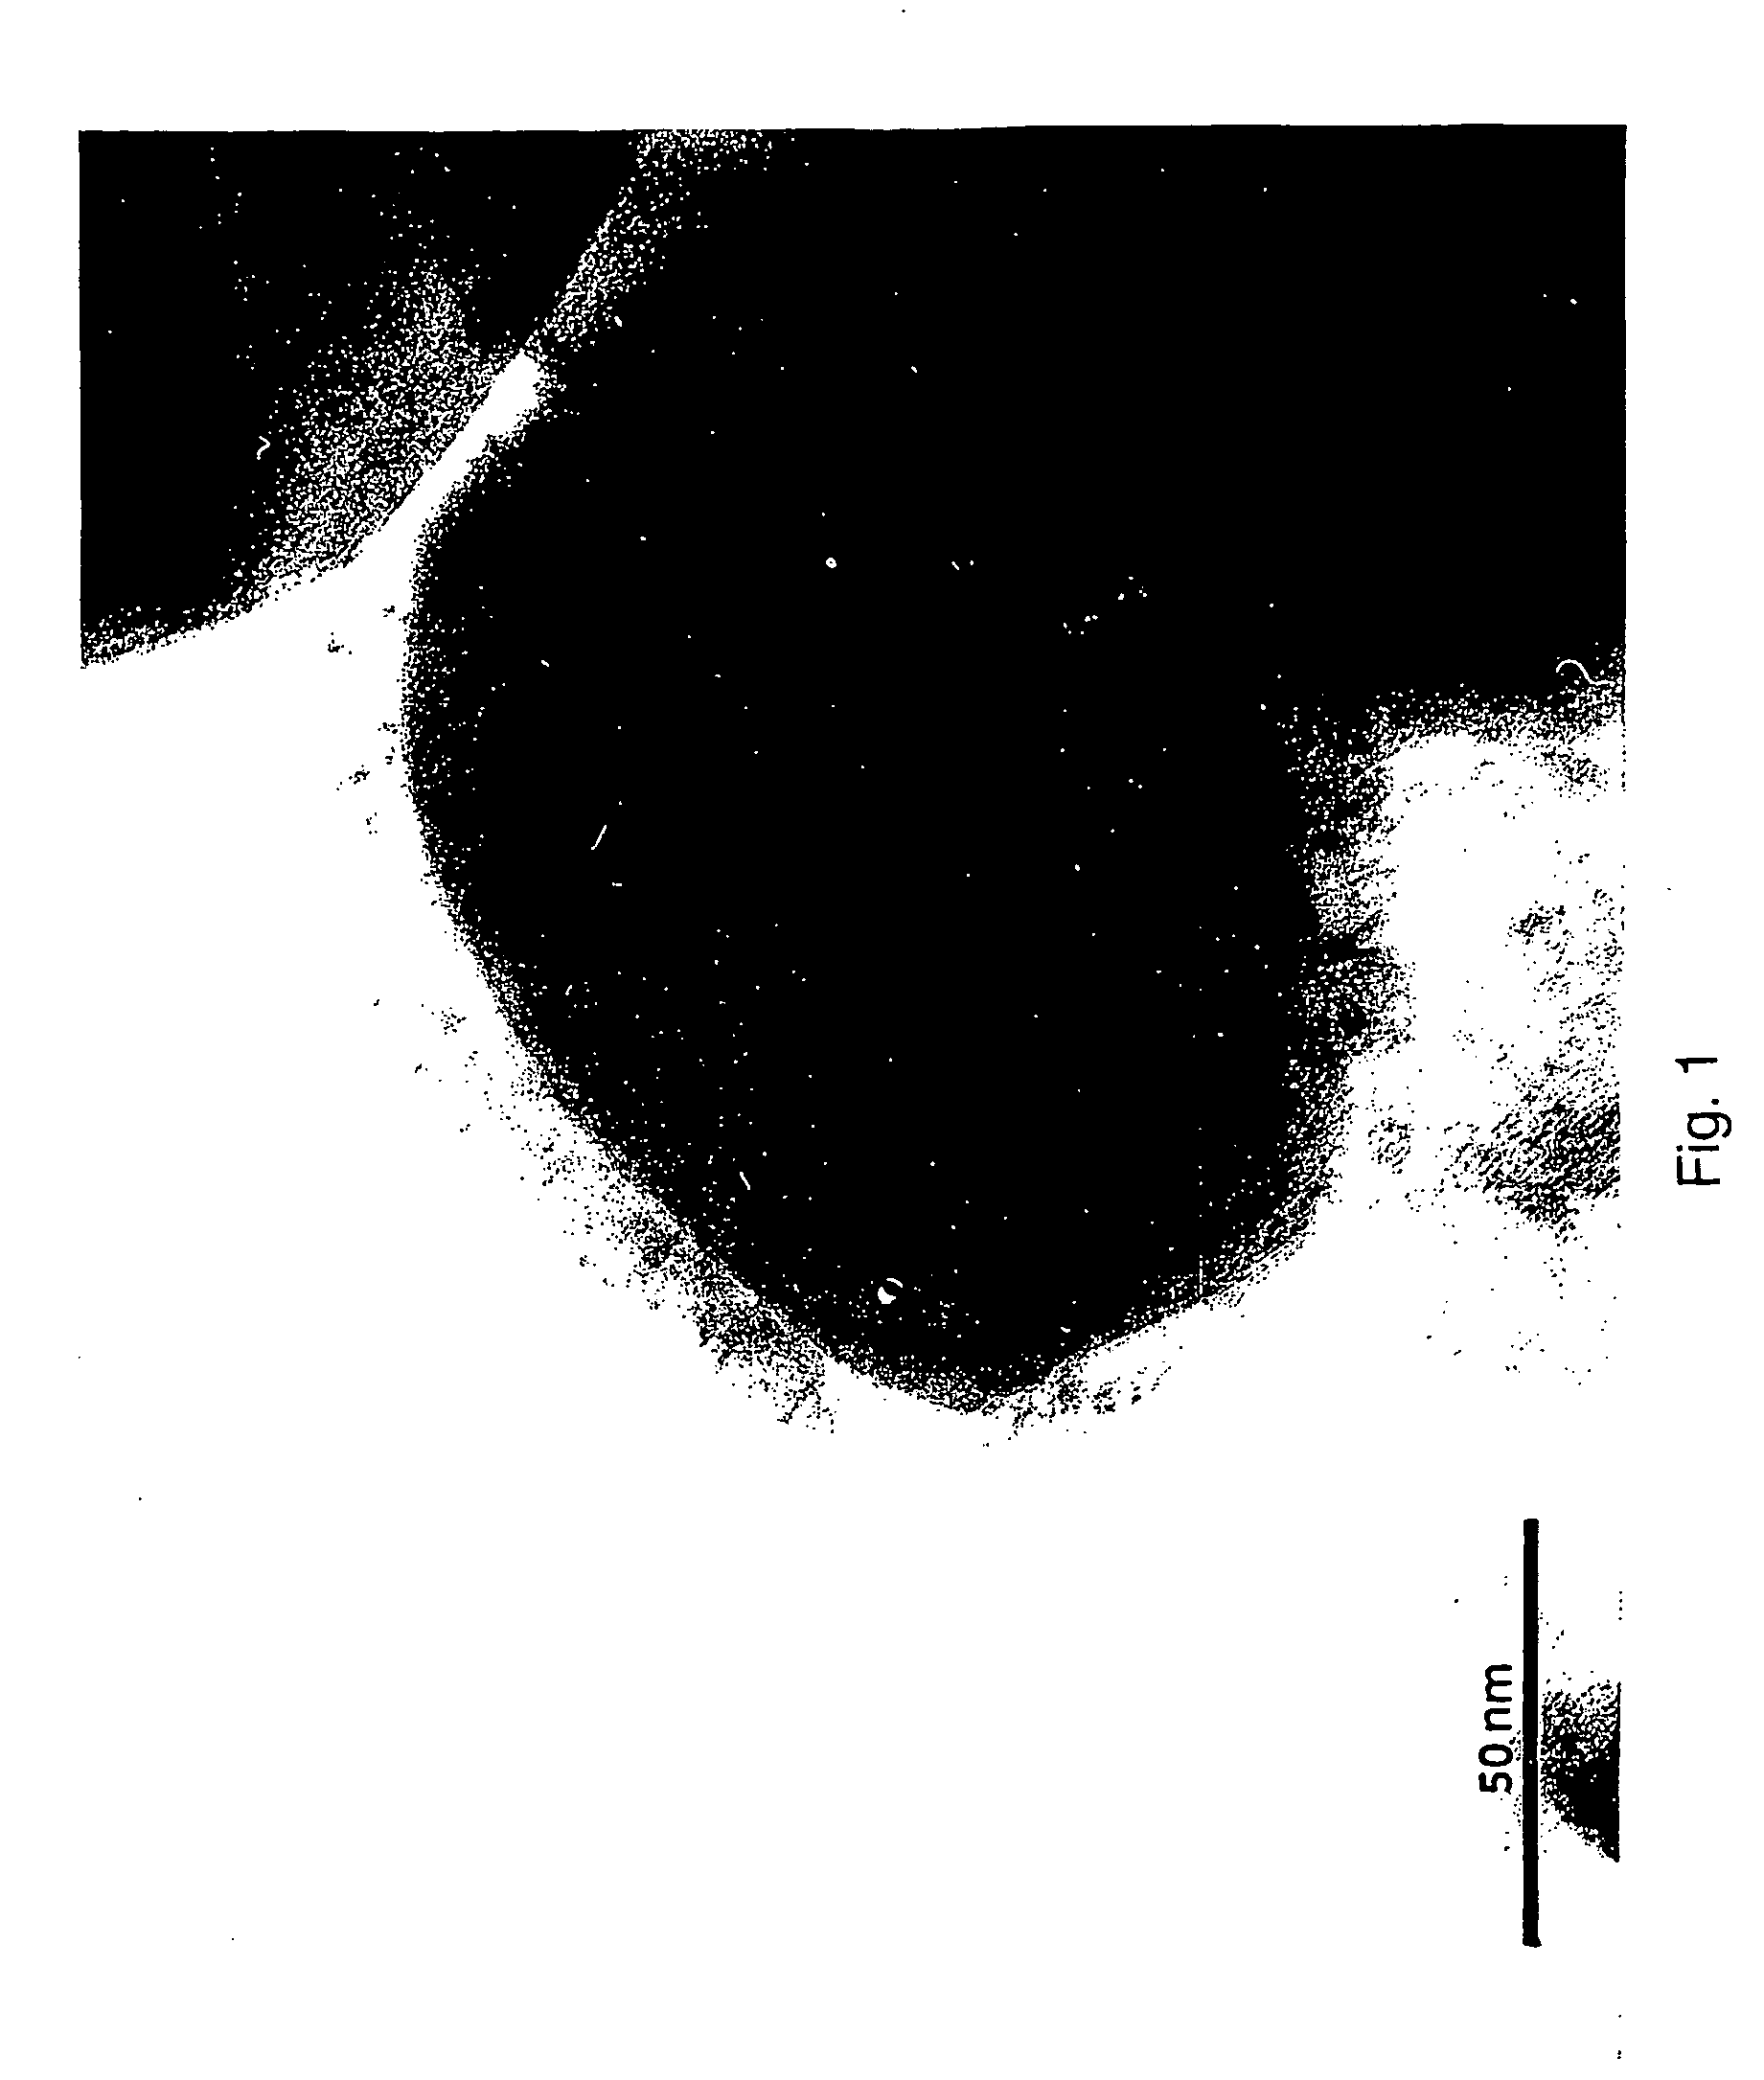 Microparticles and methods for their production